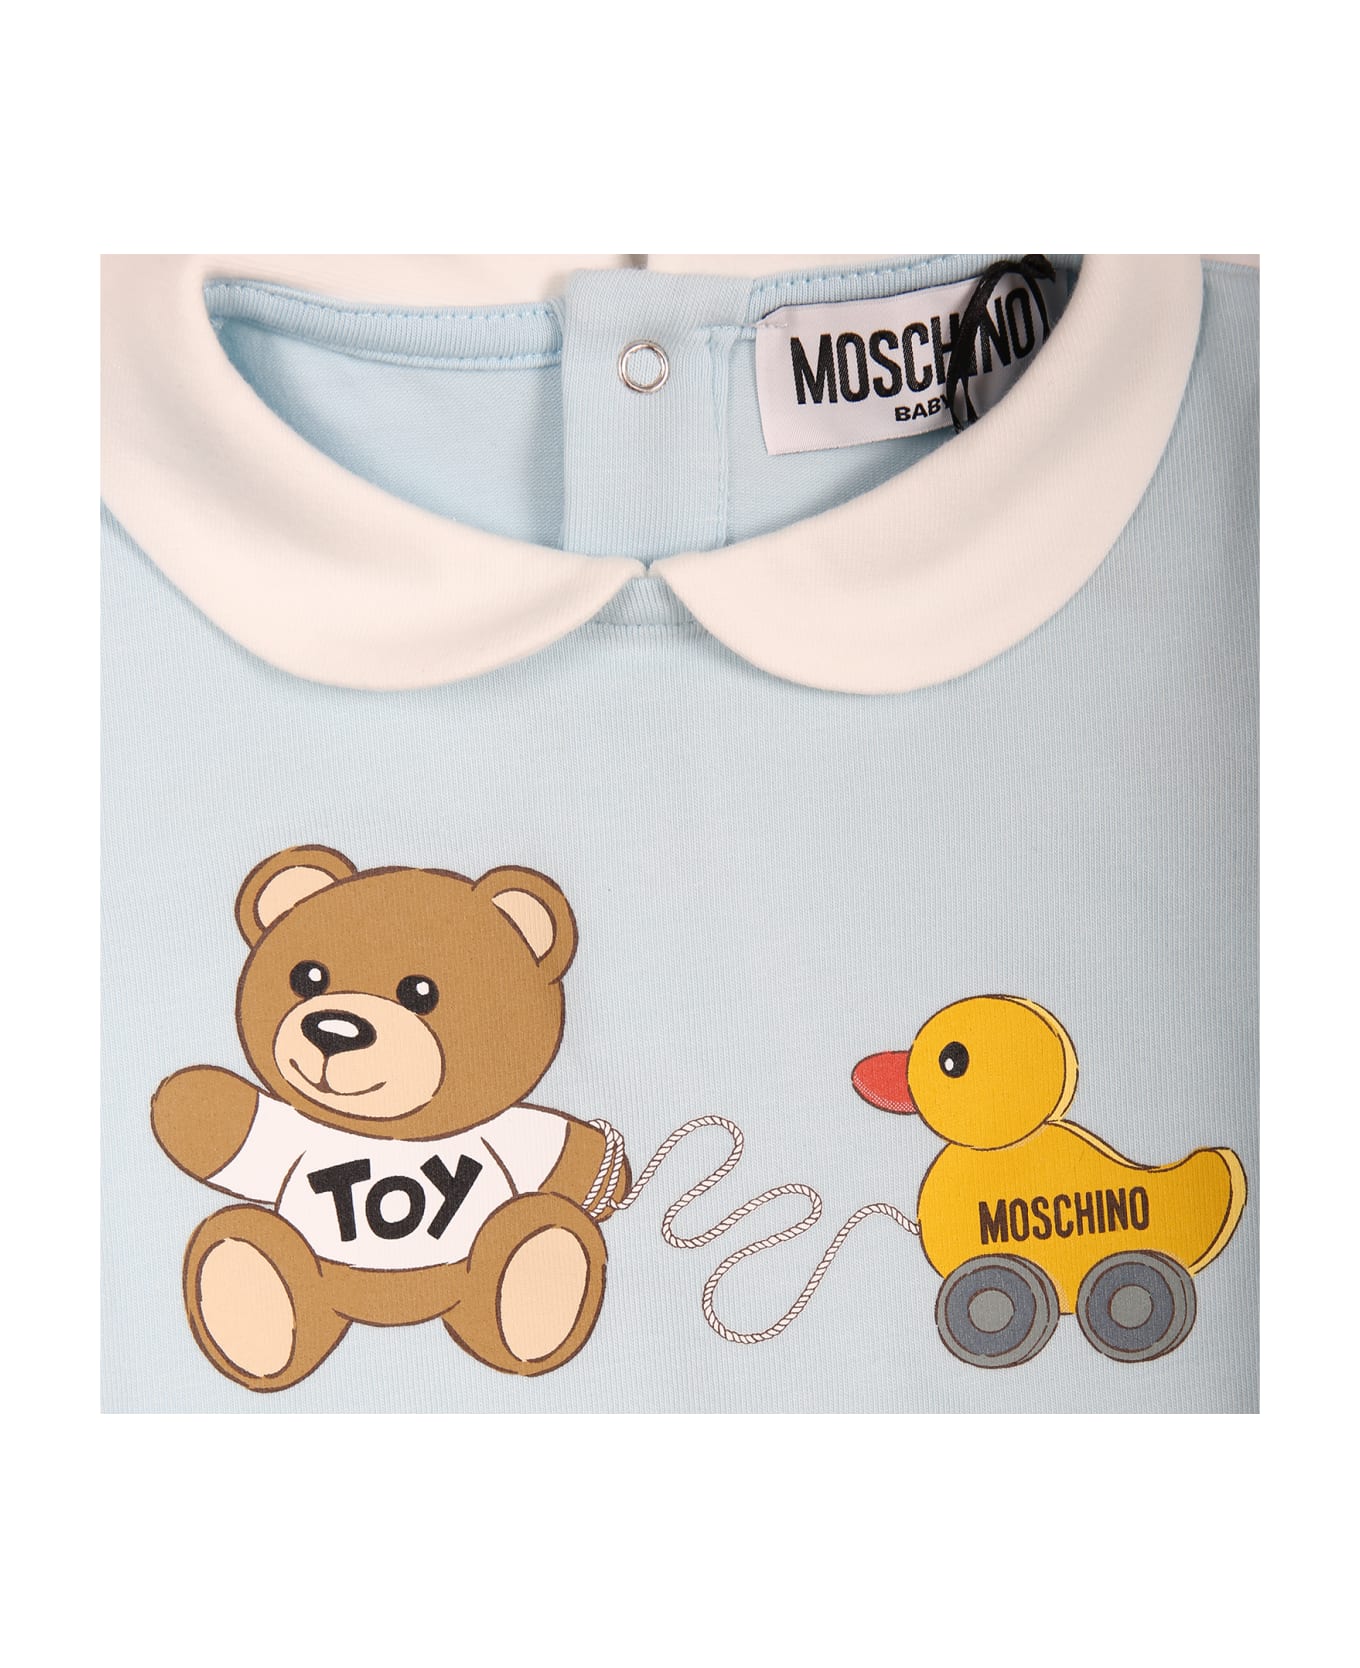 Moschino Light Blue Romper For Baby Boy With Teddy Bear - Light Blue